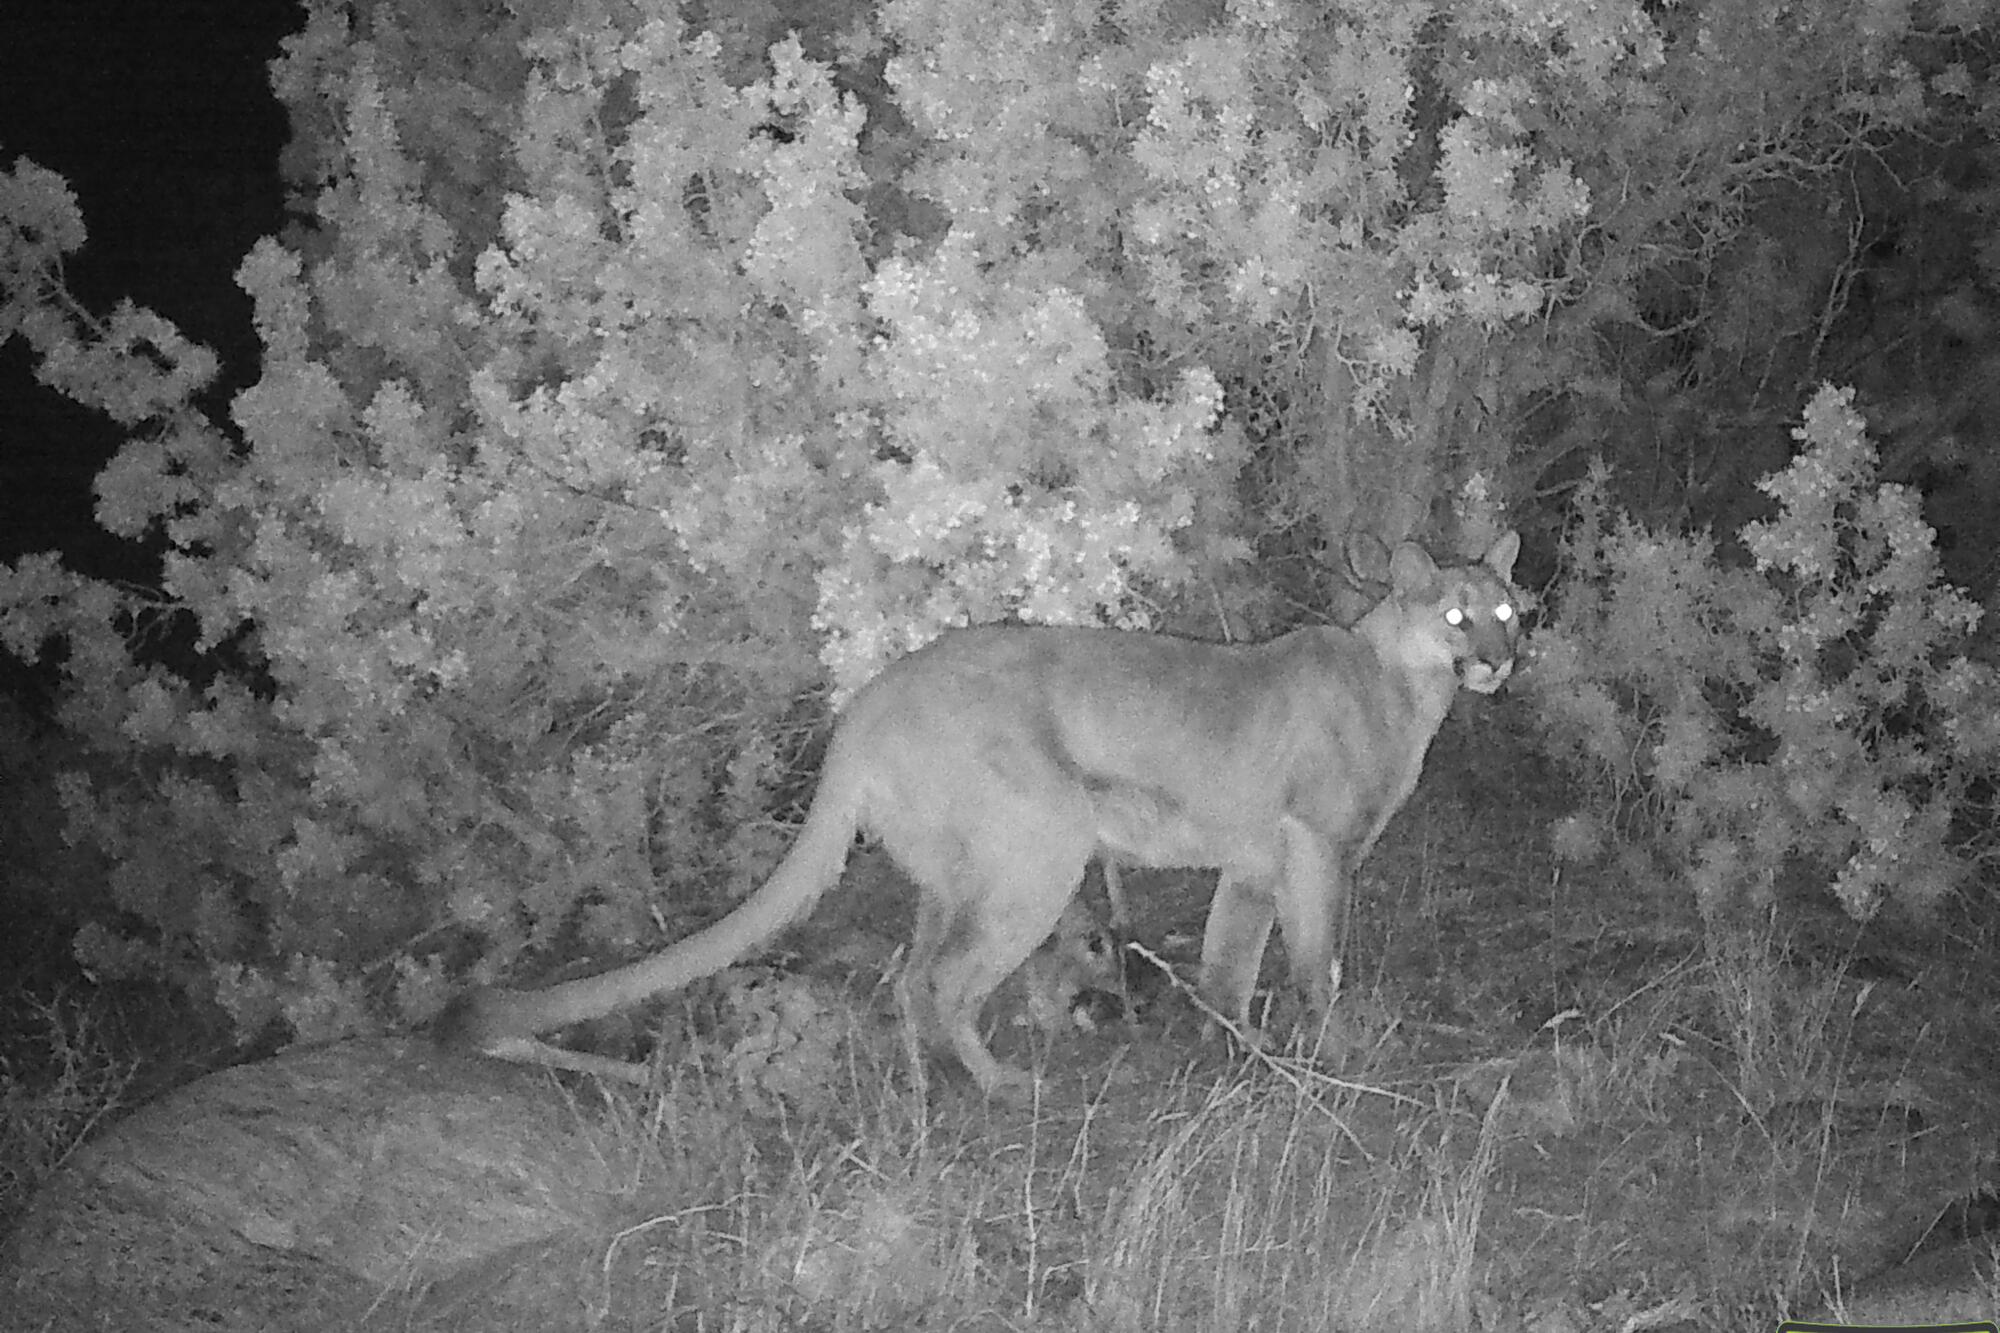 A mountain lion in Joshua Tree National Park, captured by a night-vision camera in black-and-white